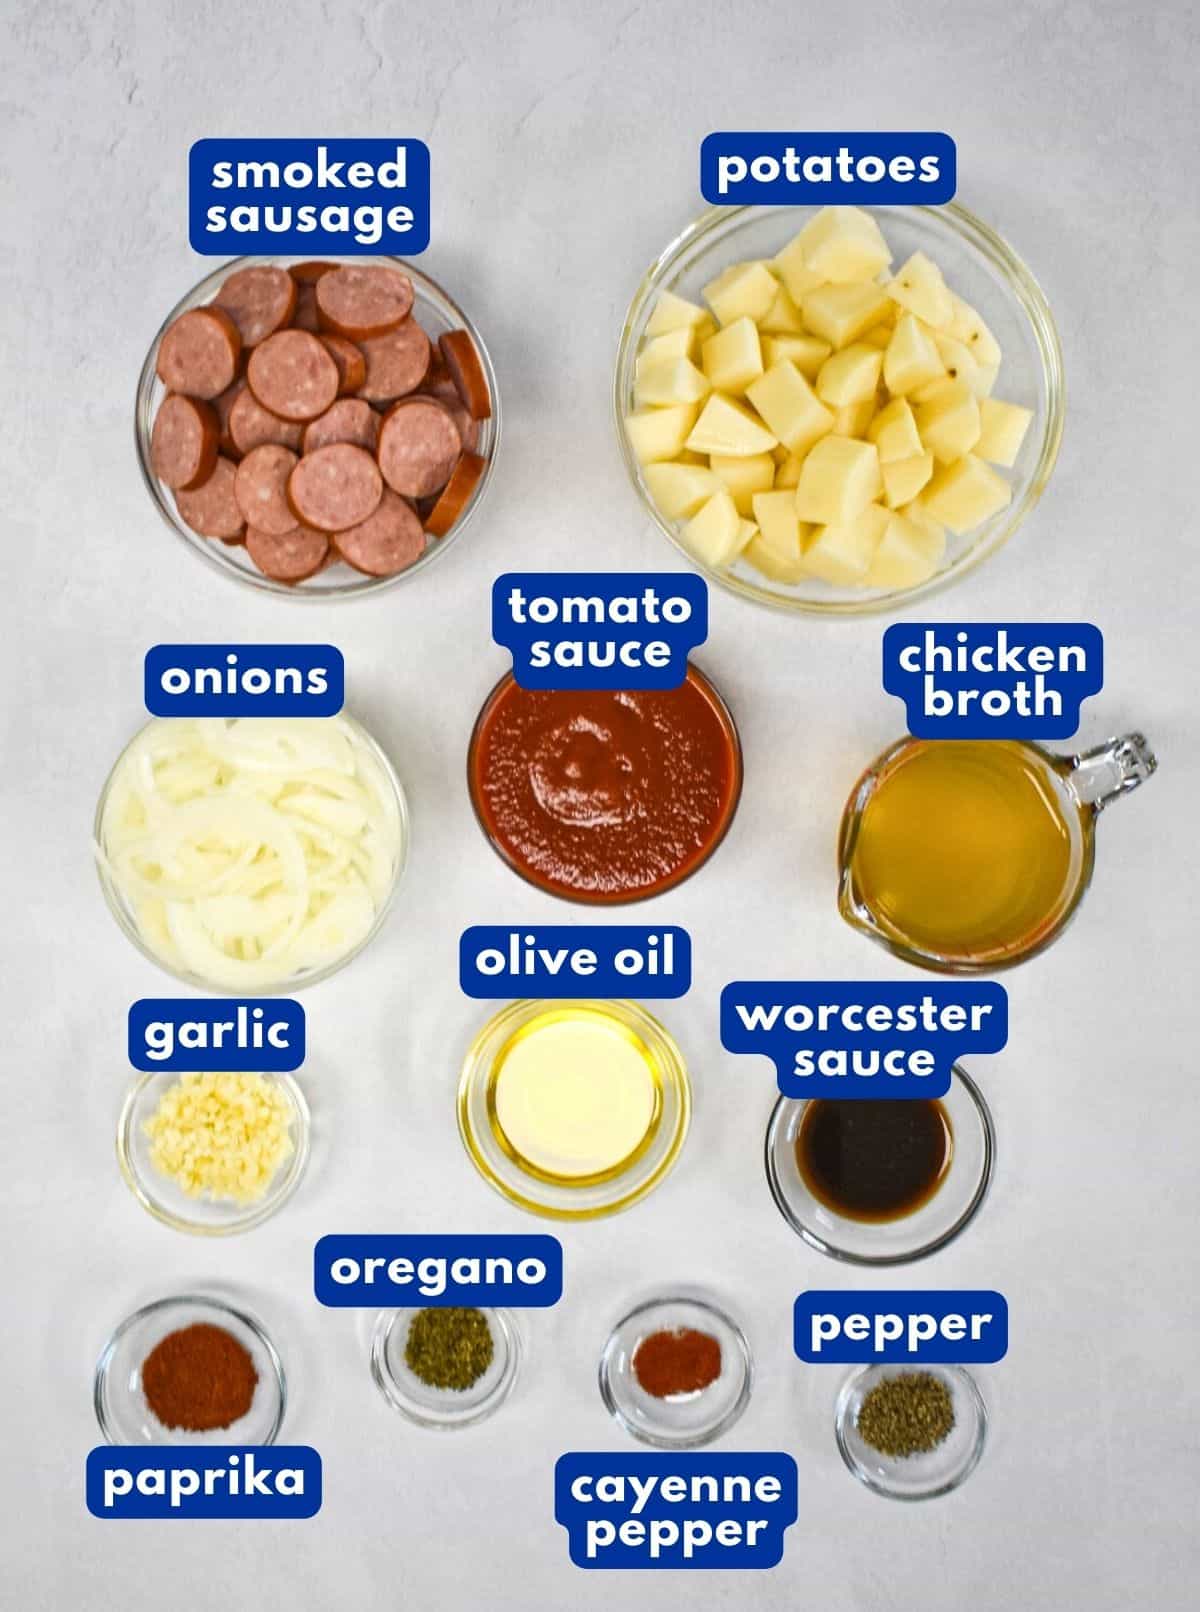 The ingredients for the sausage and potatoes skillet prepped and arranged on a white table with each labeled with blue and white letters.